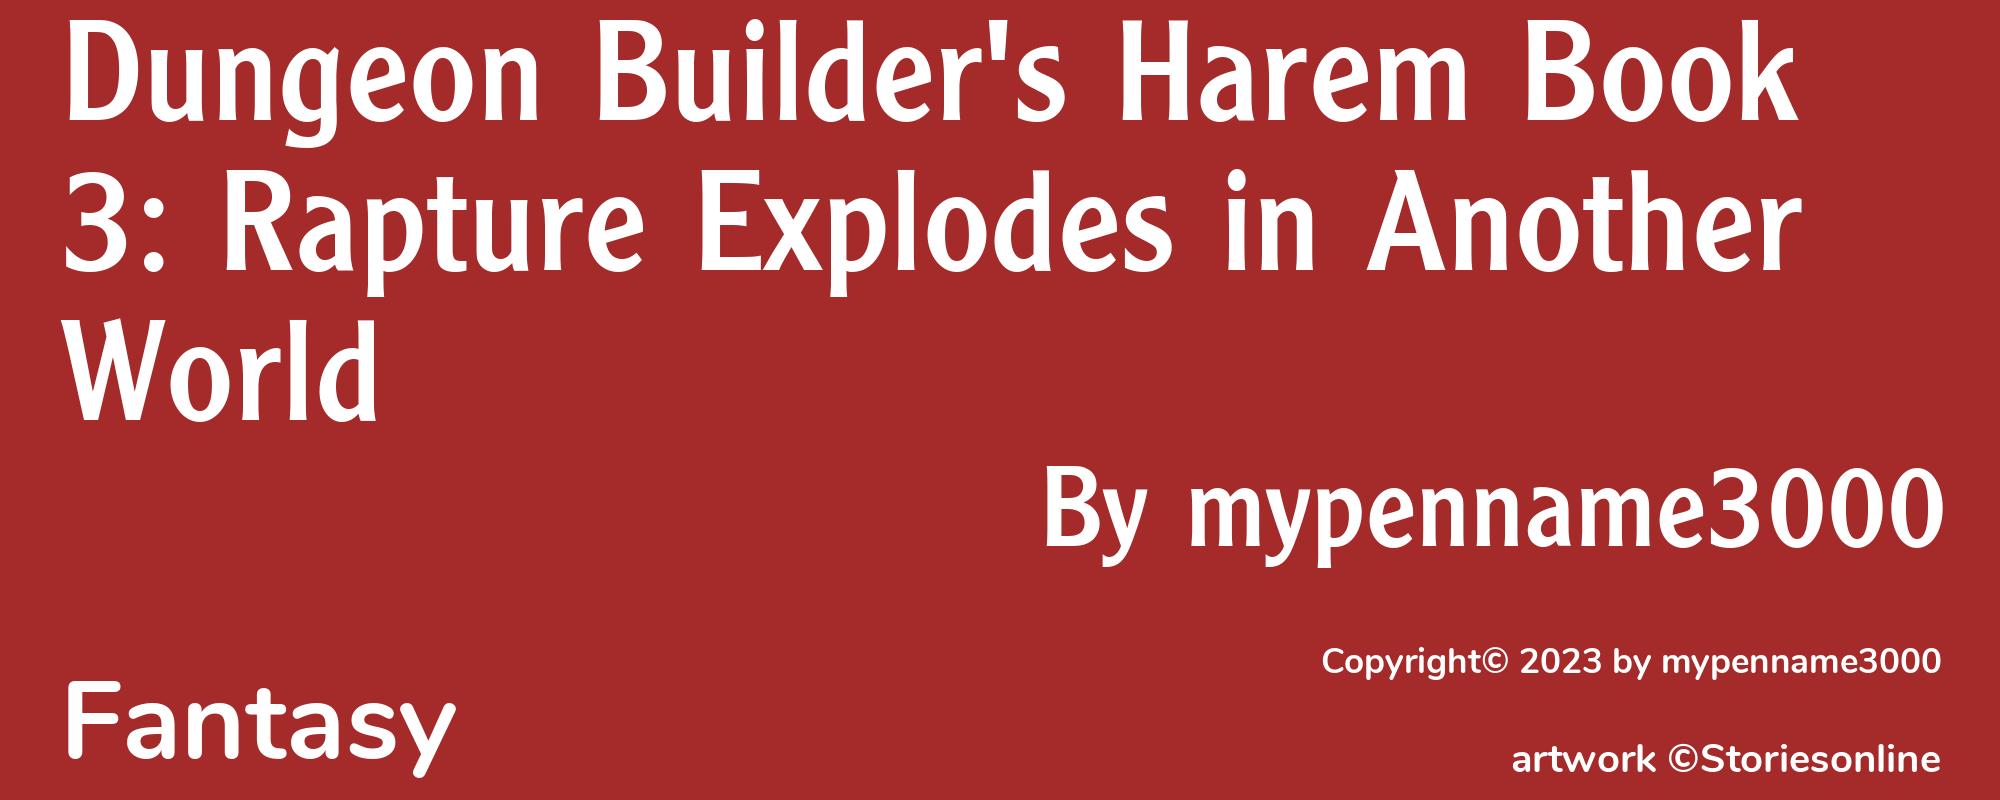 Dungeon Builder's Harem Book 3: Rapture Explodes in Another World - Cover